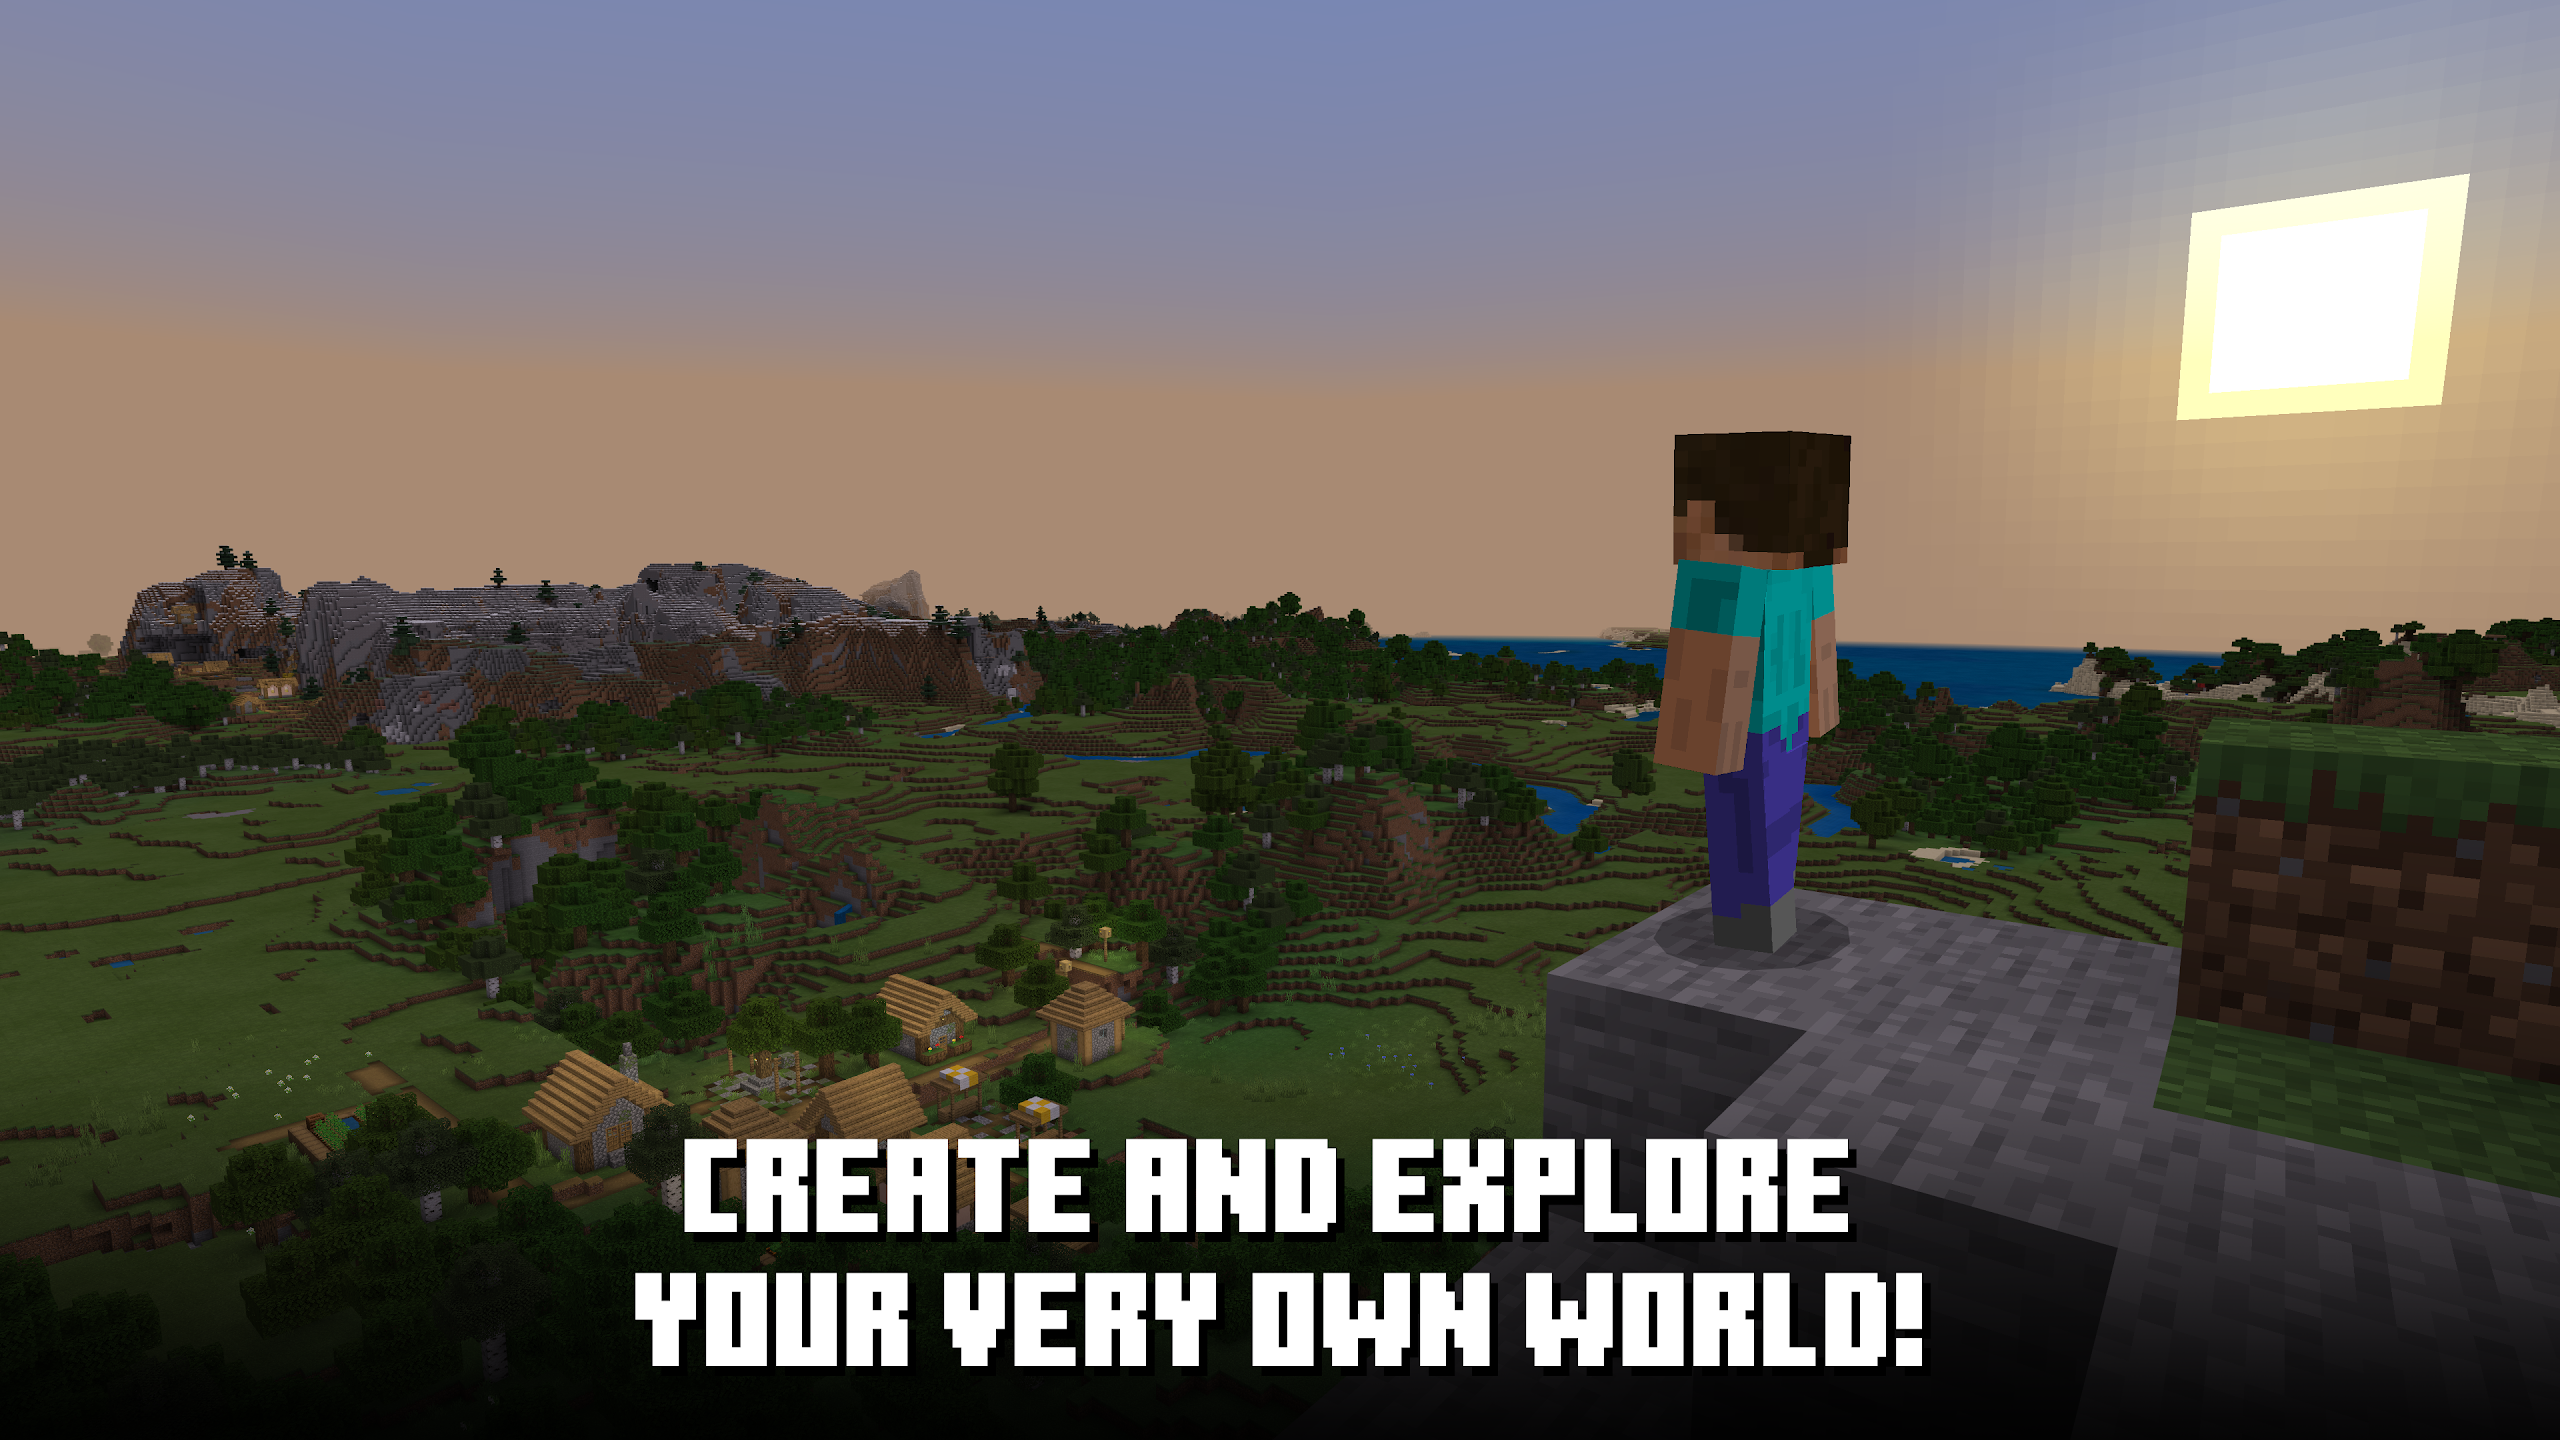 Download Minecraft 1.19.50.22 for Android free